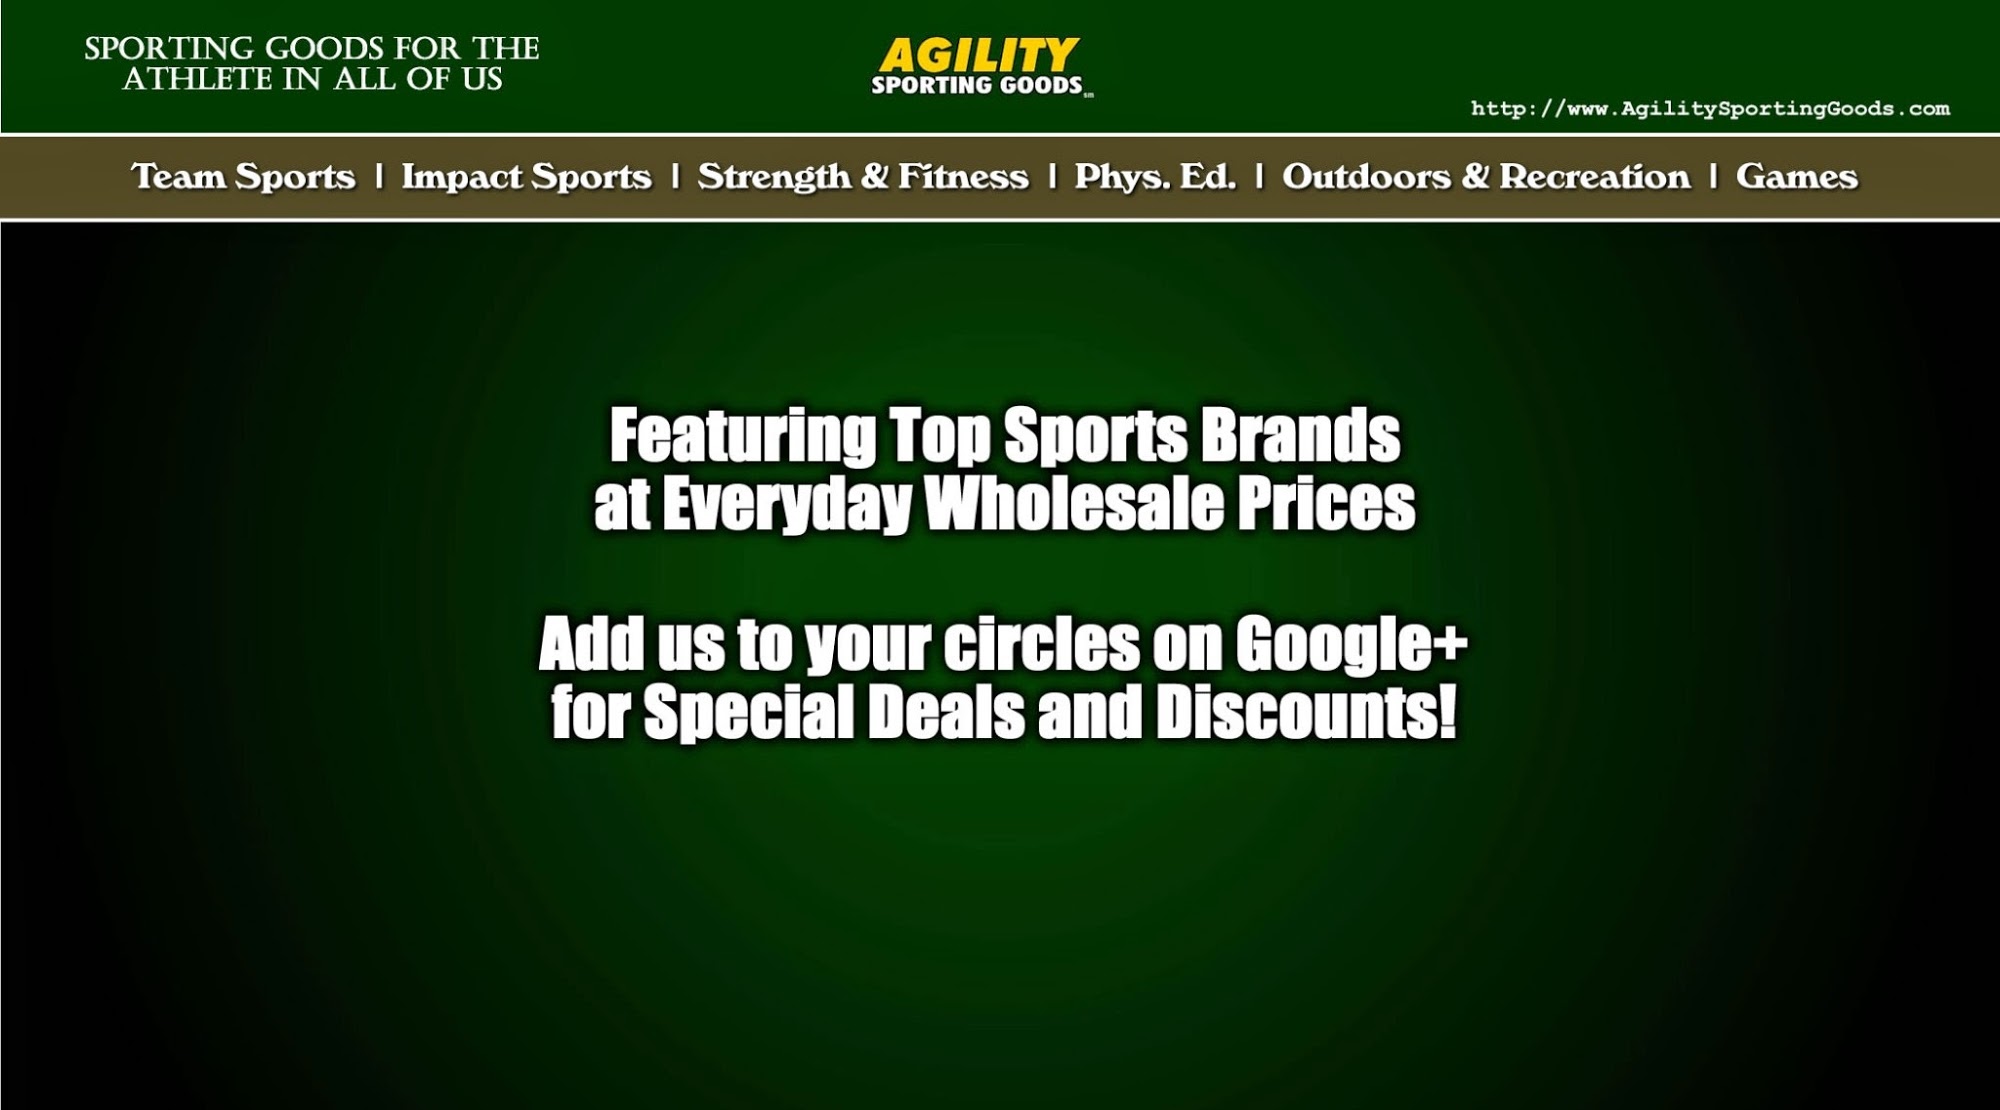 Agility Sporting Goods